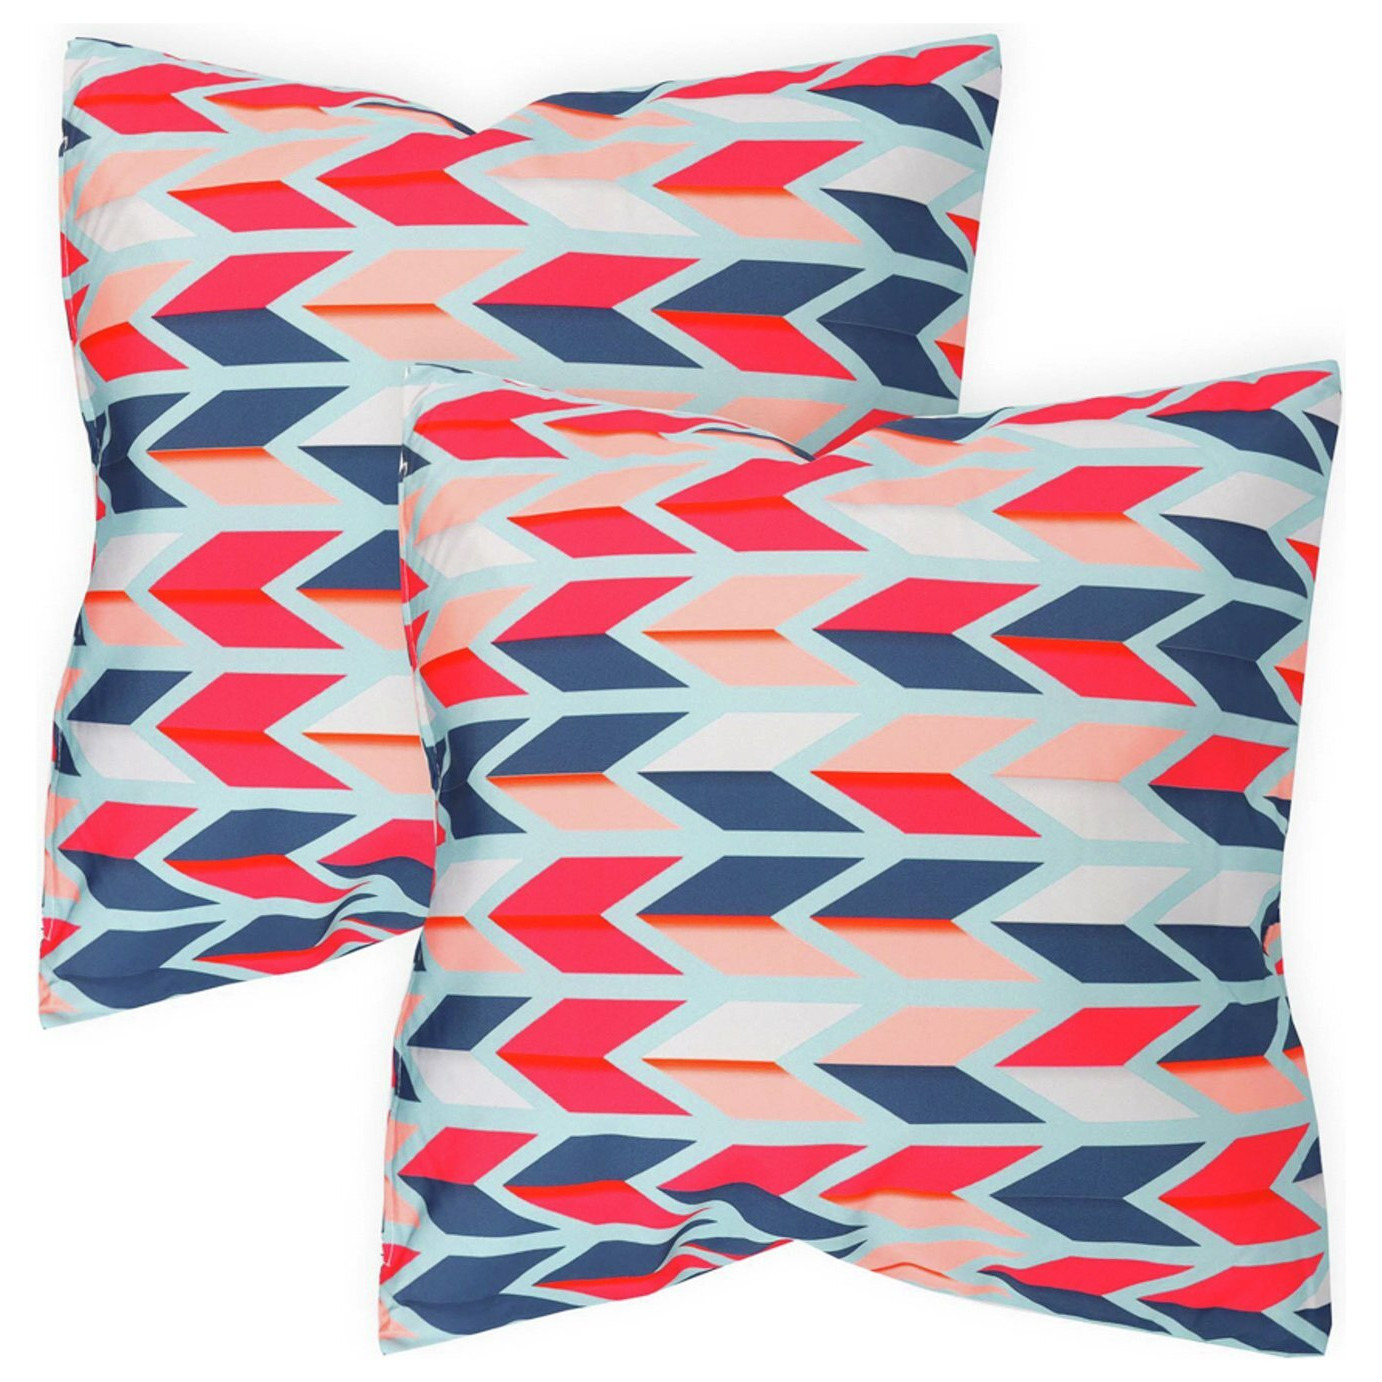 Streetwize Arrow Outdoor Cushions - Pack of 4 - image 1